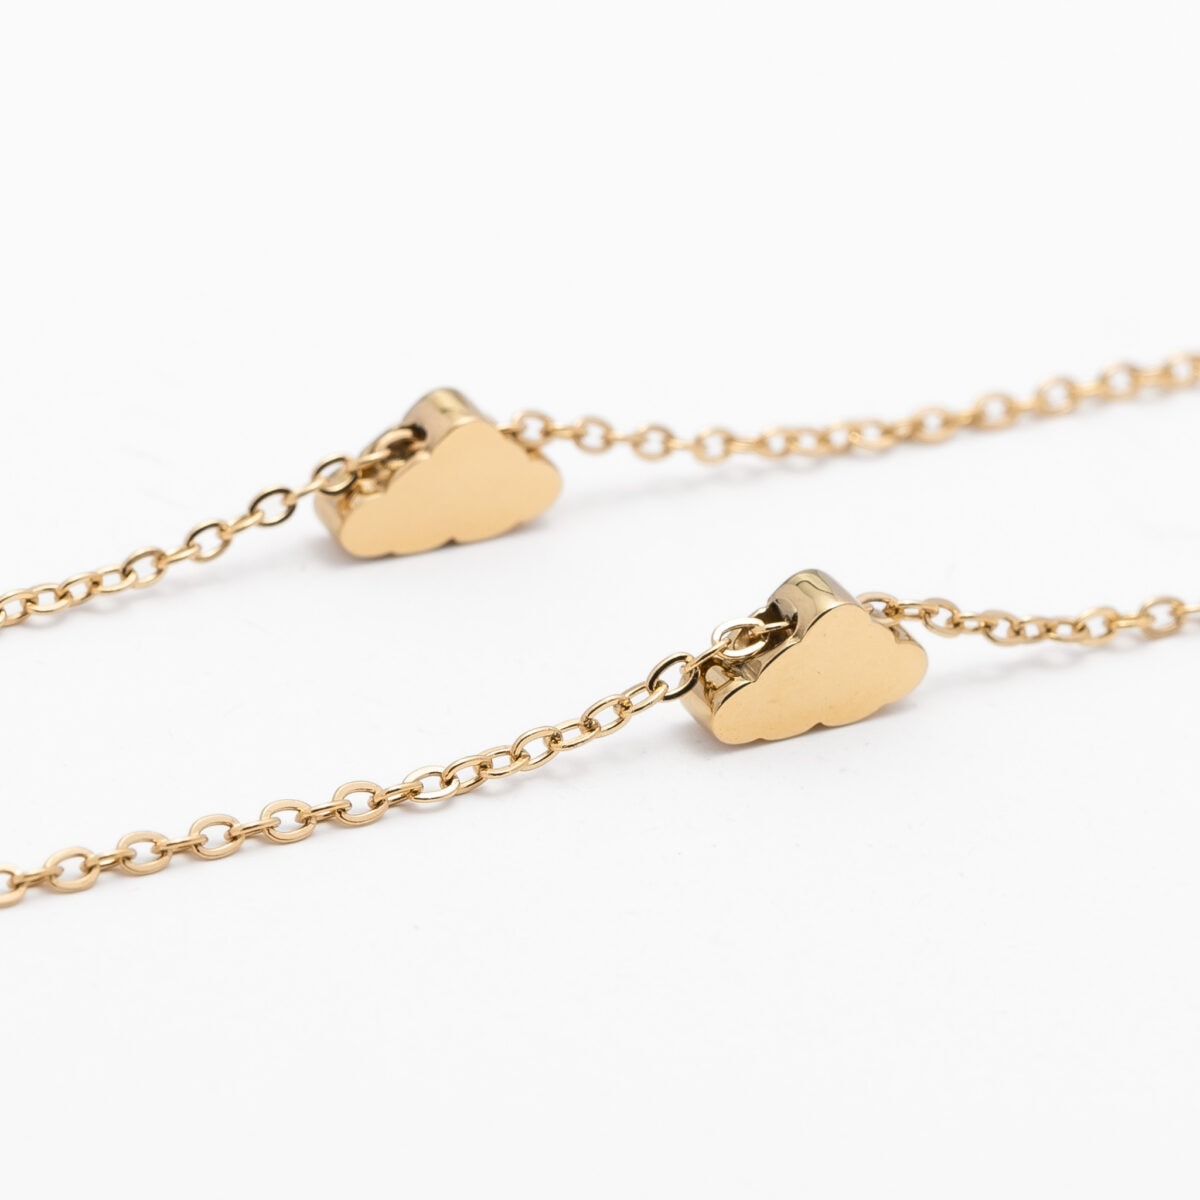 https://m.clubbella.co/product/volare-cloud-gold-charm-necklace/ Volare Cloud Gold Charm 5